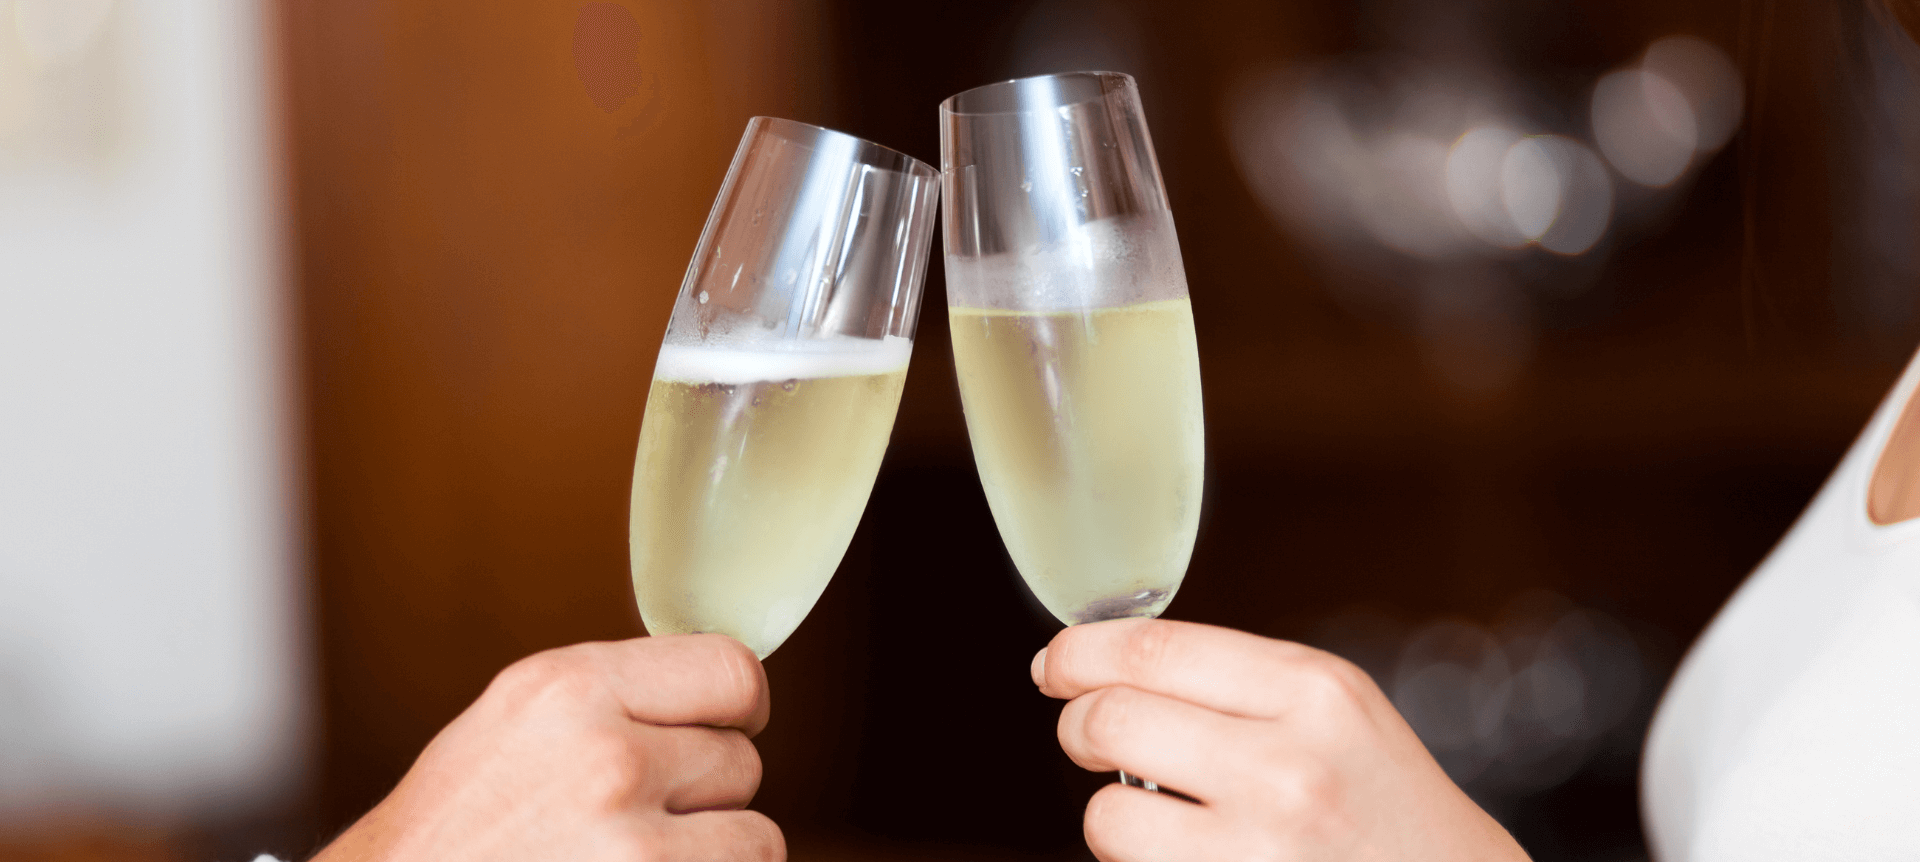 Two people toasting with champagne glasses 